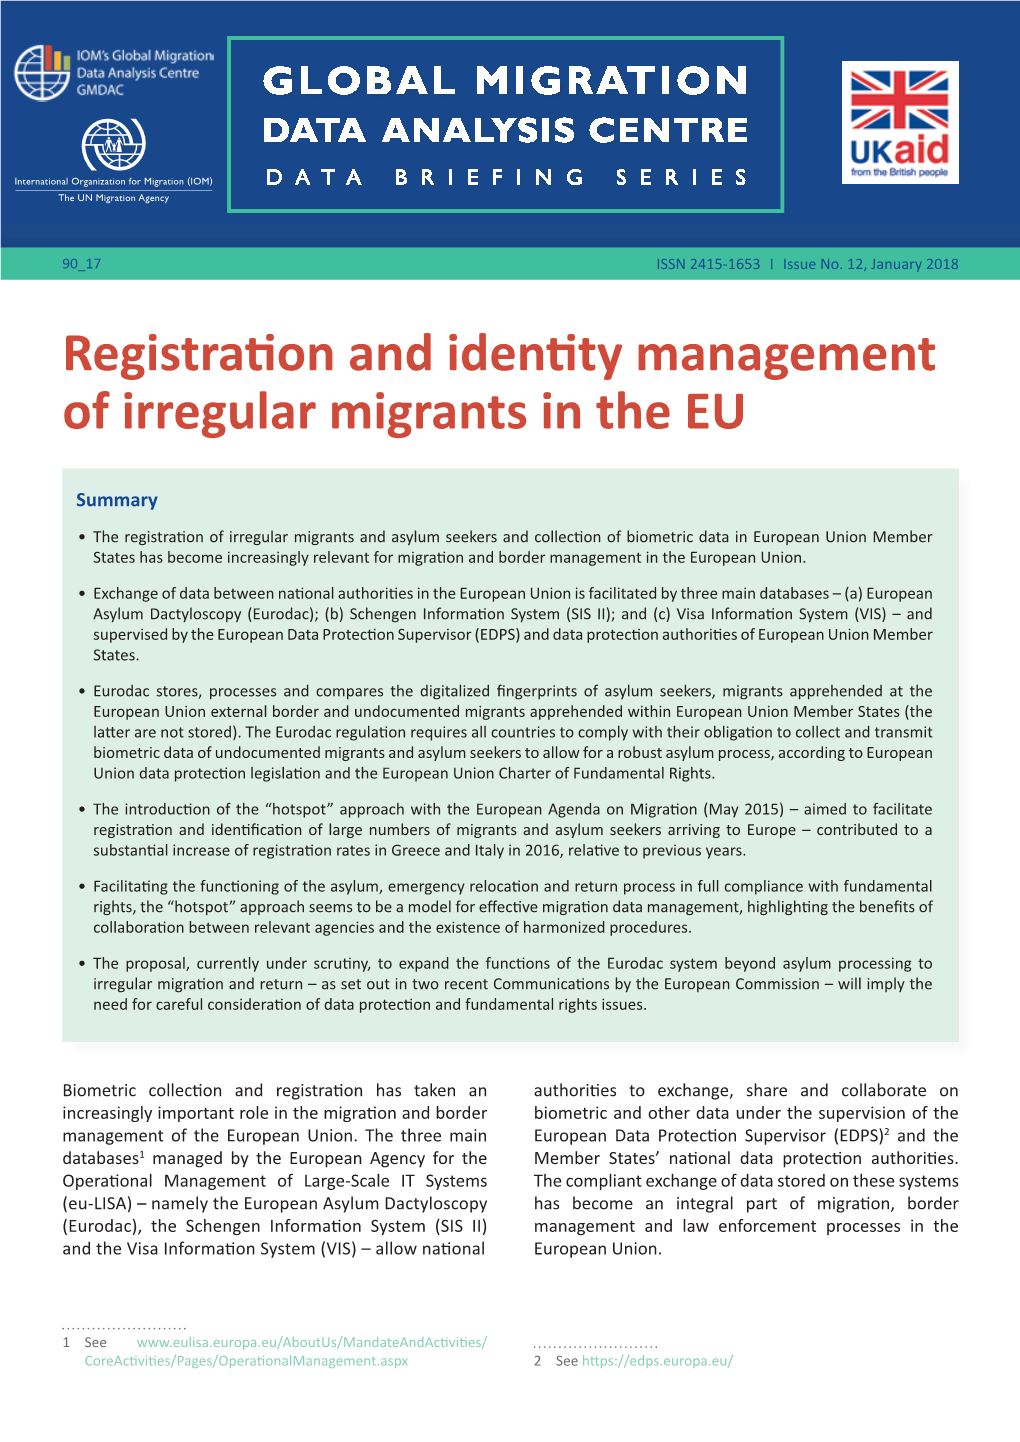 Registration and Identity Management of Irregular Migrants in the EU